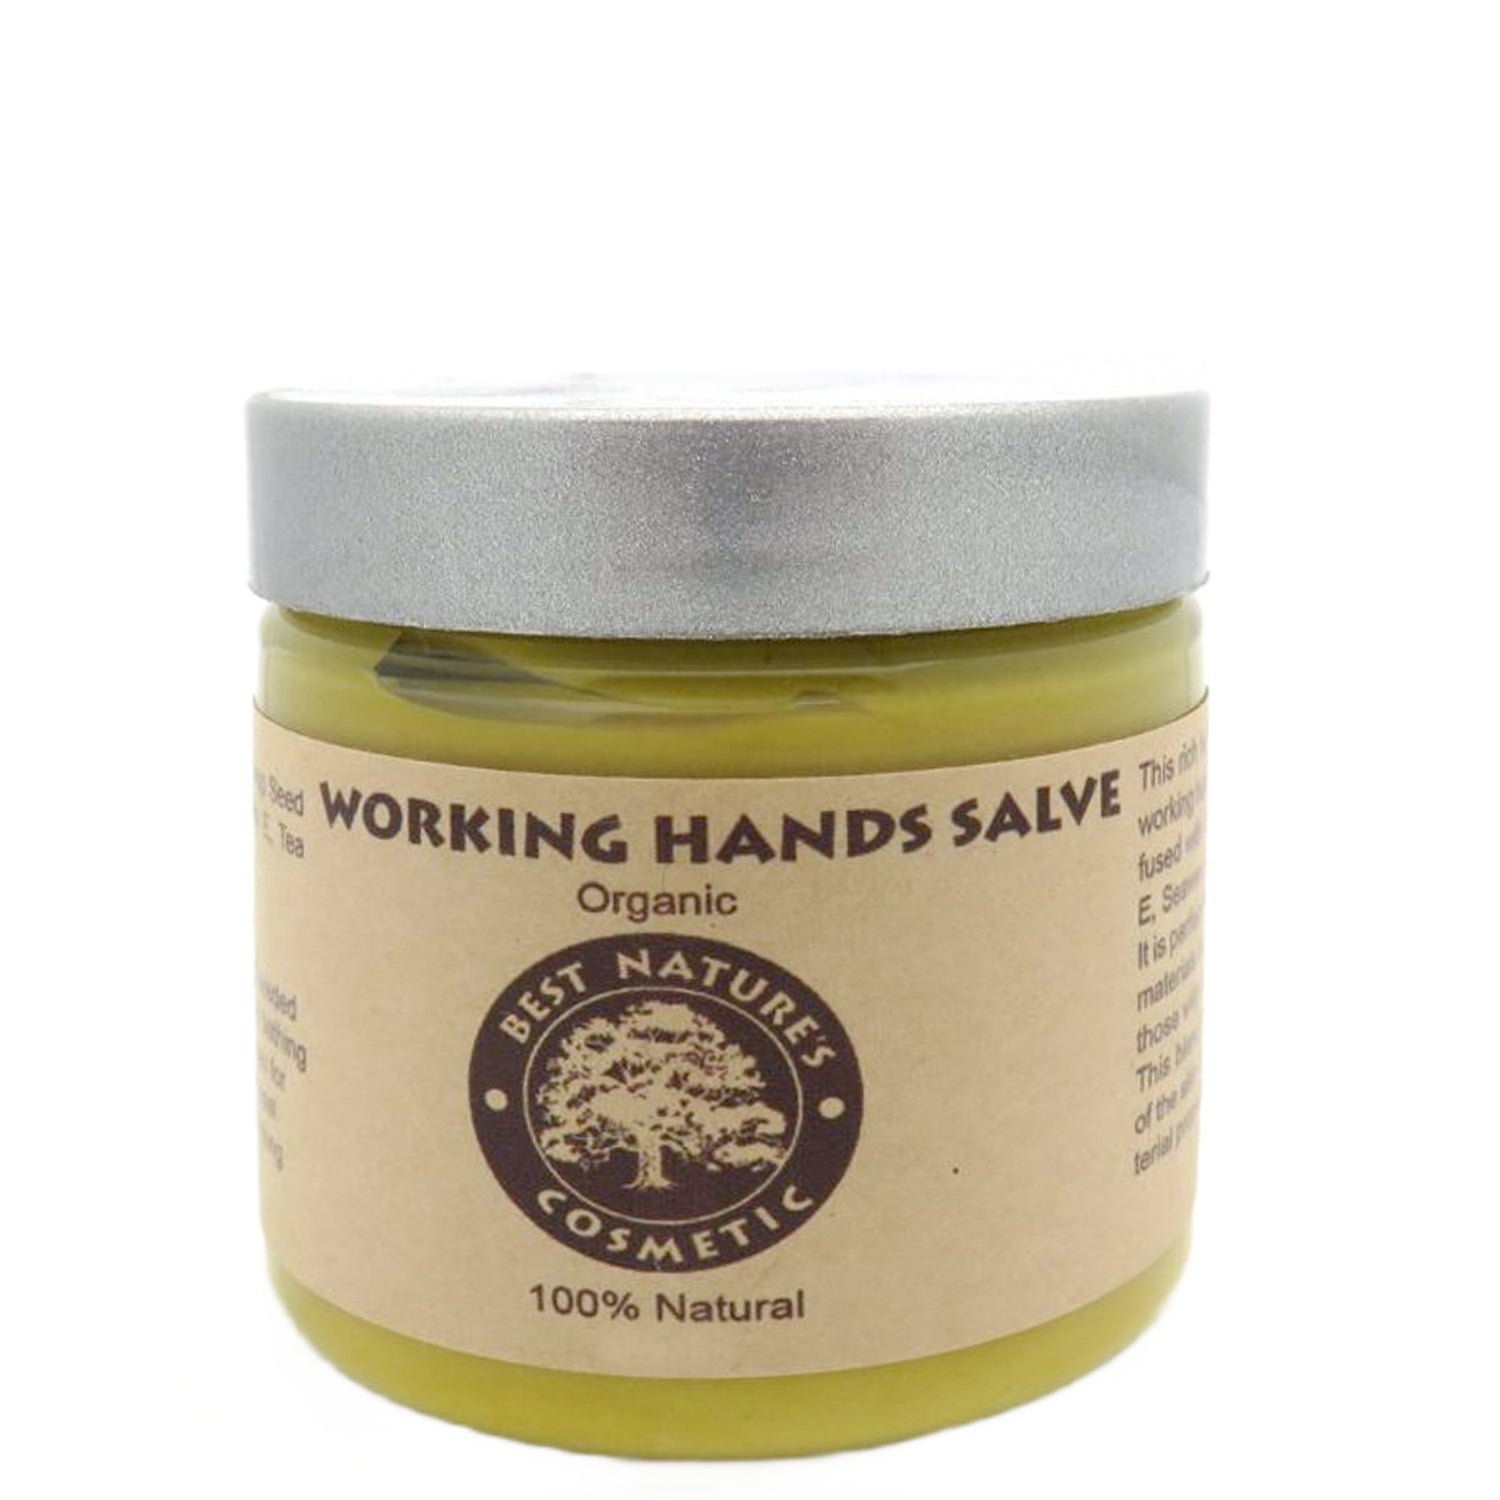 Organic Working Hands Salve for hard working hands, will sooth dry, chapped, calloused working hands... 5oz / 150ml